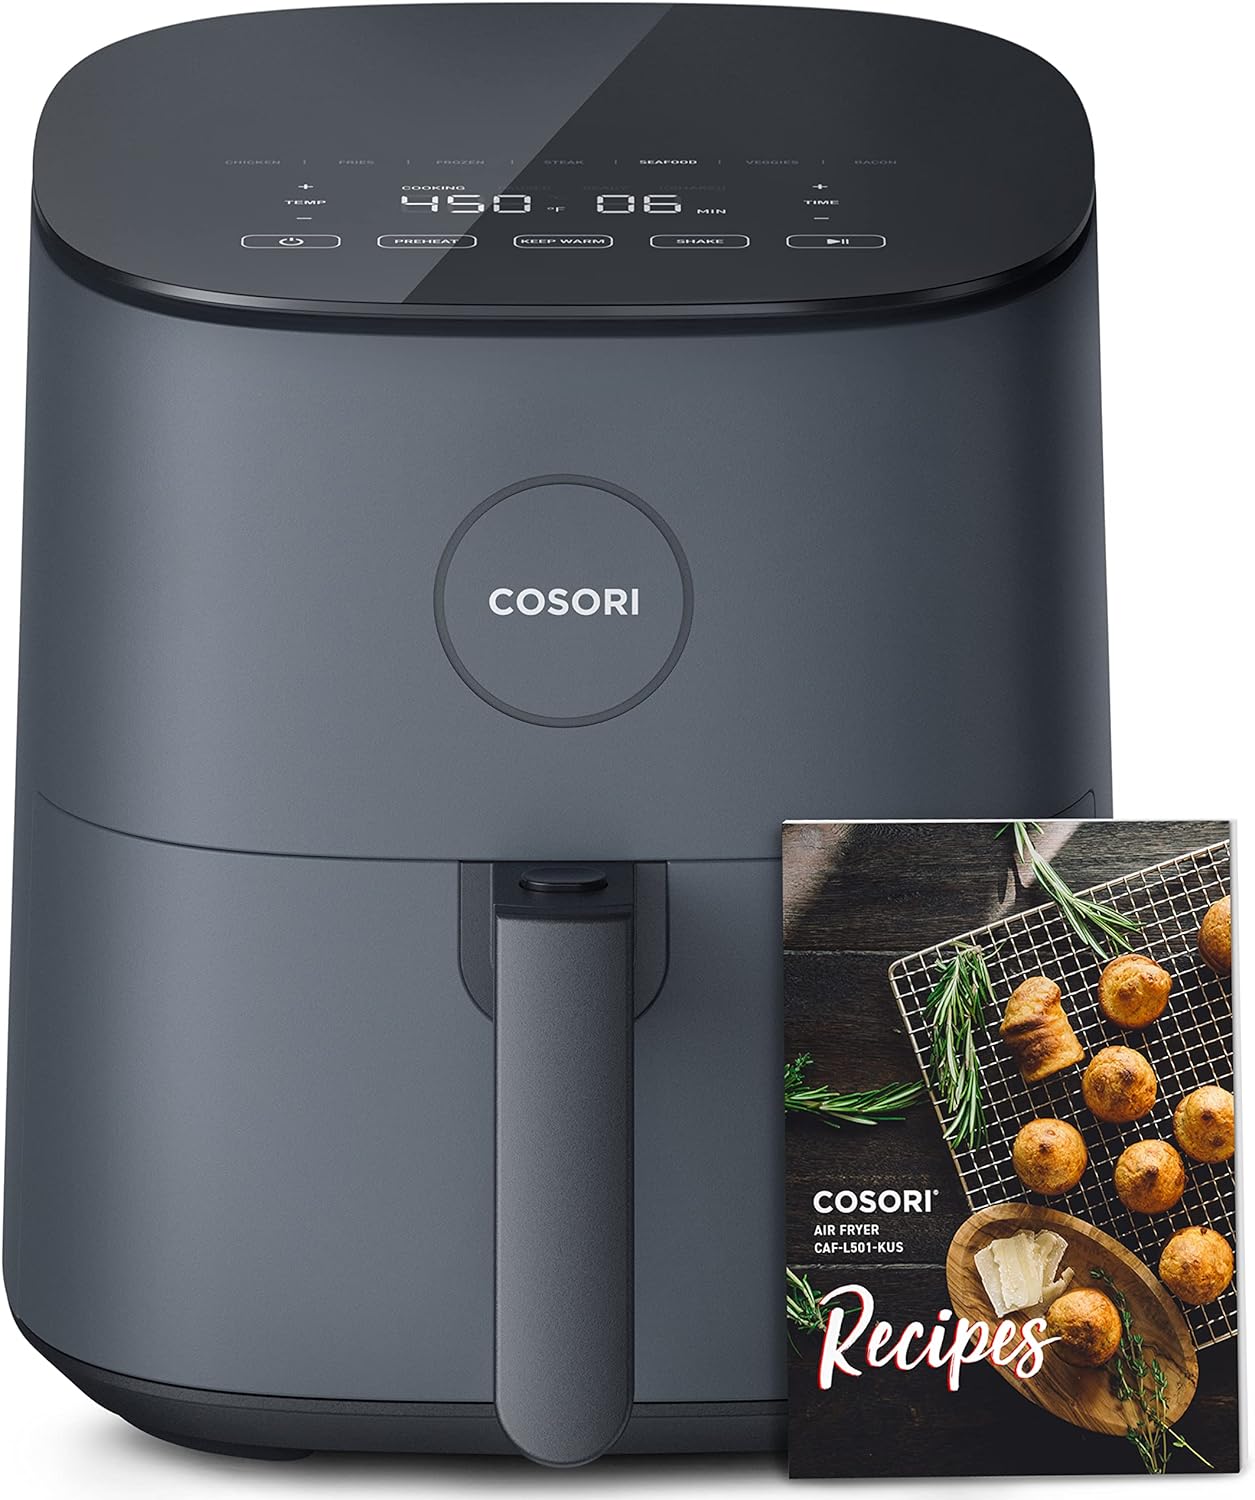 imaget of the best small air fryer cosori air fryer pro 5 quart model